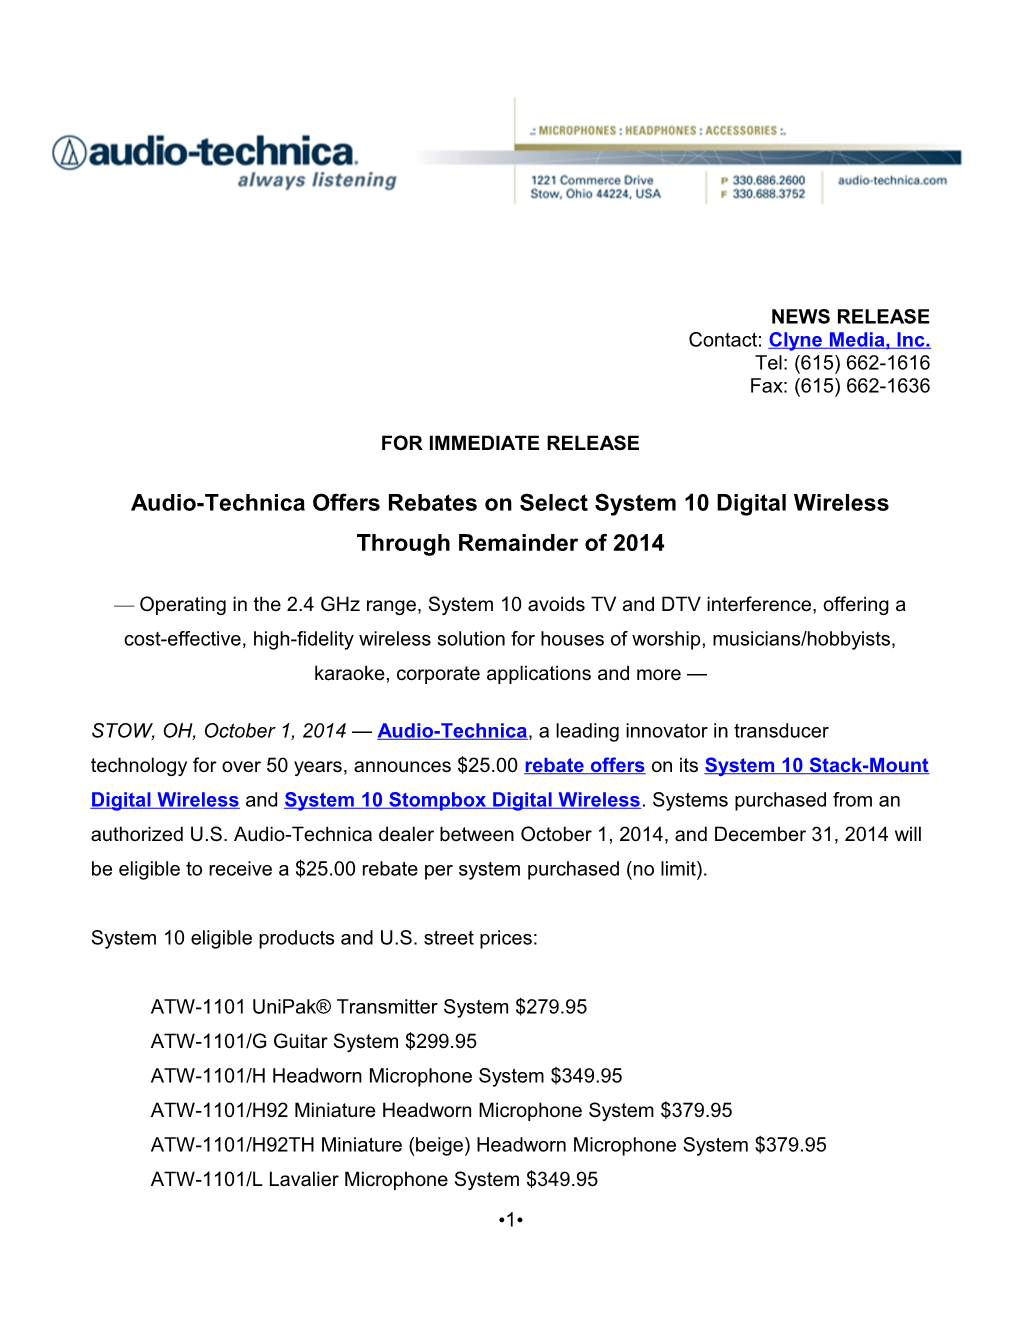 Audio-Technica Offers Rebates on Select System 10 Digital Wireless Through Remainder of 2014